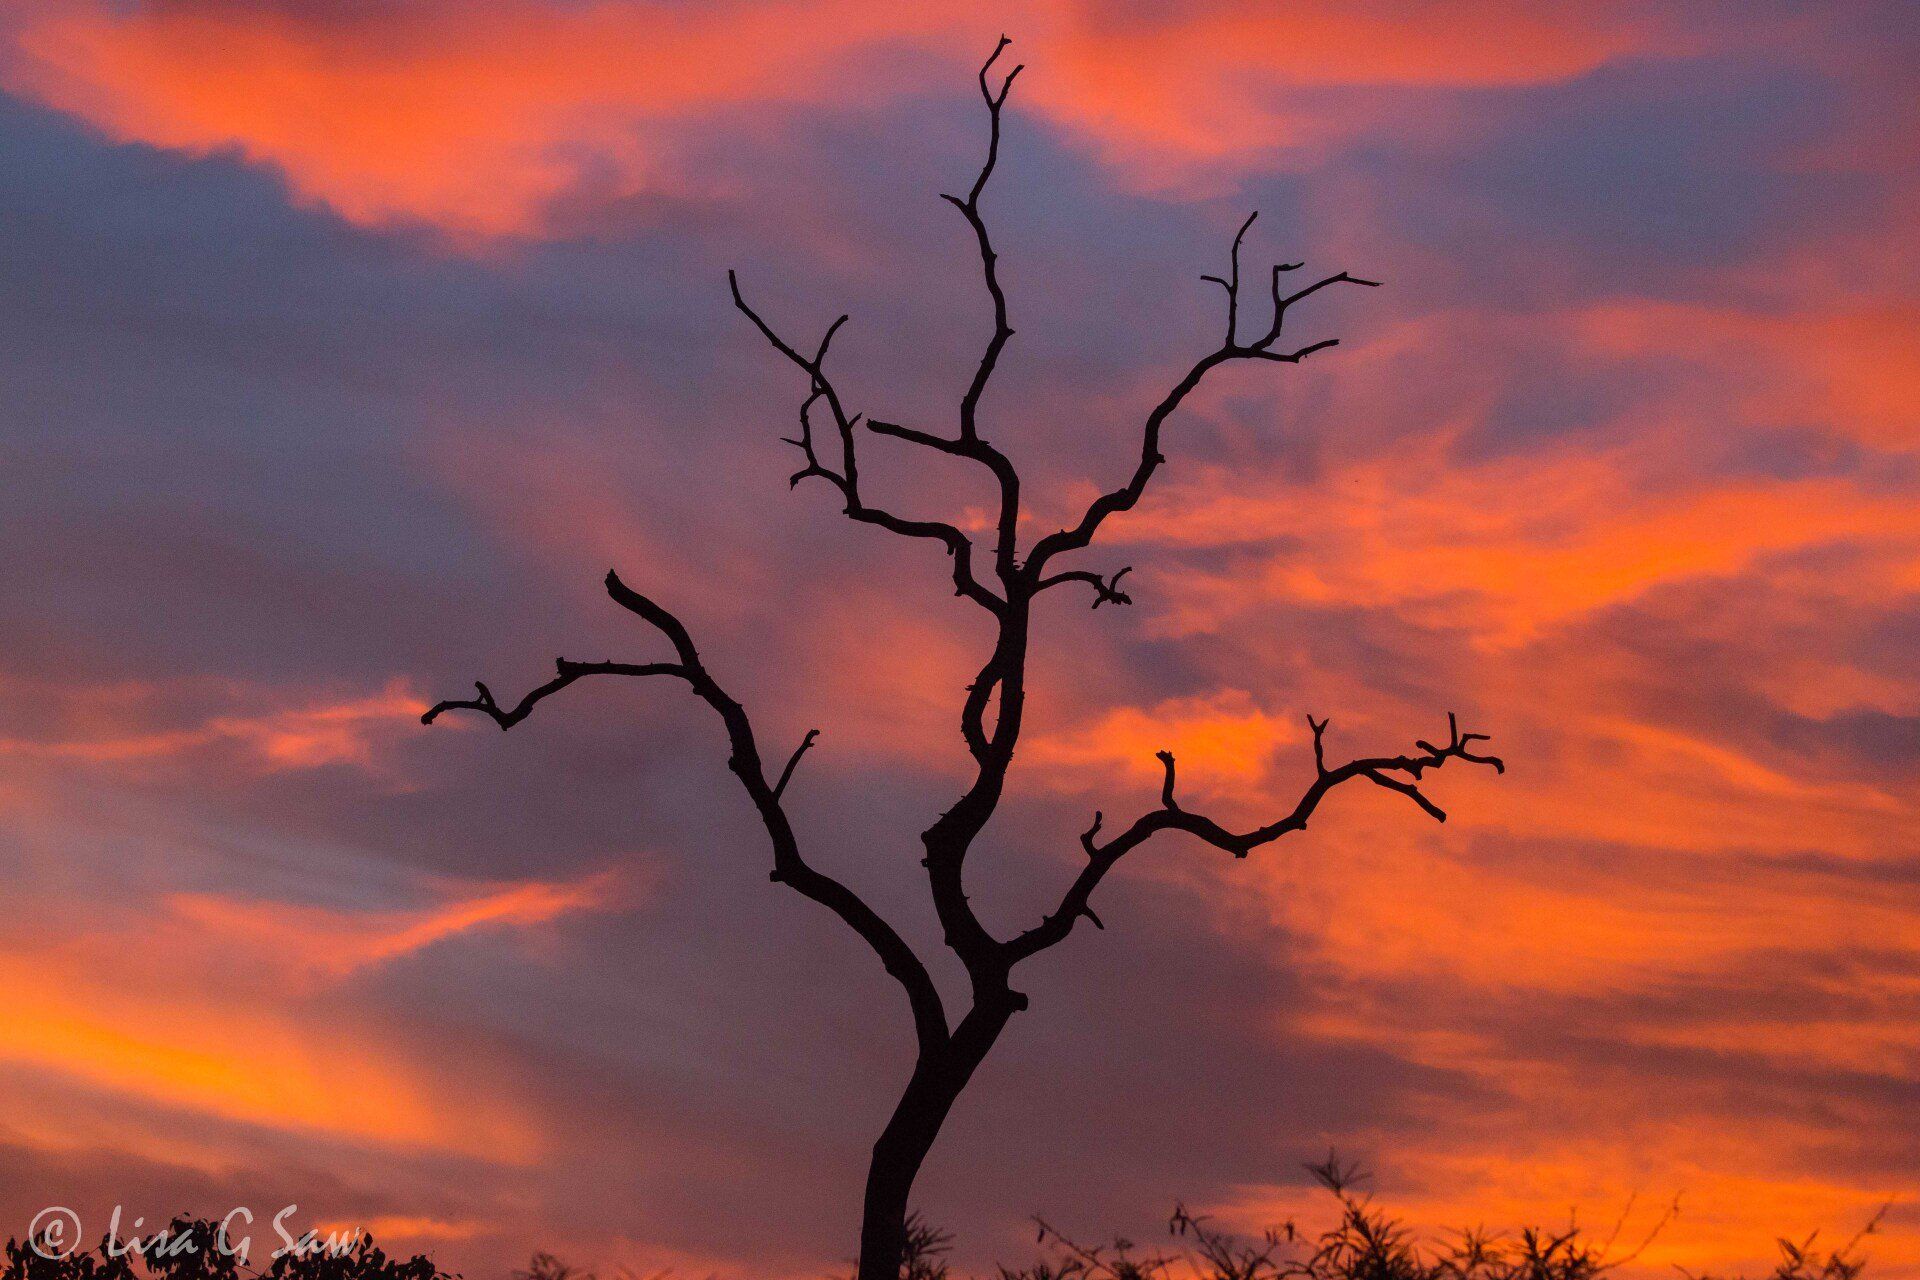 Dead tree against orange clouds at sunset